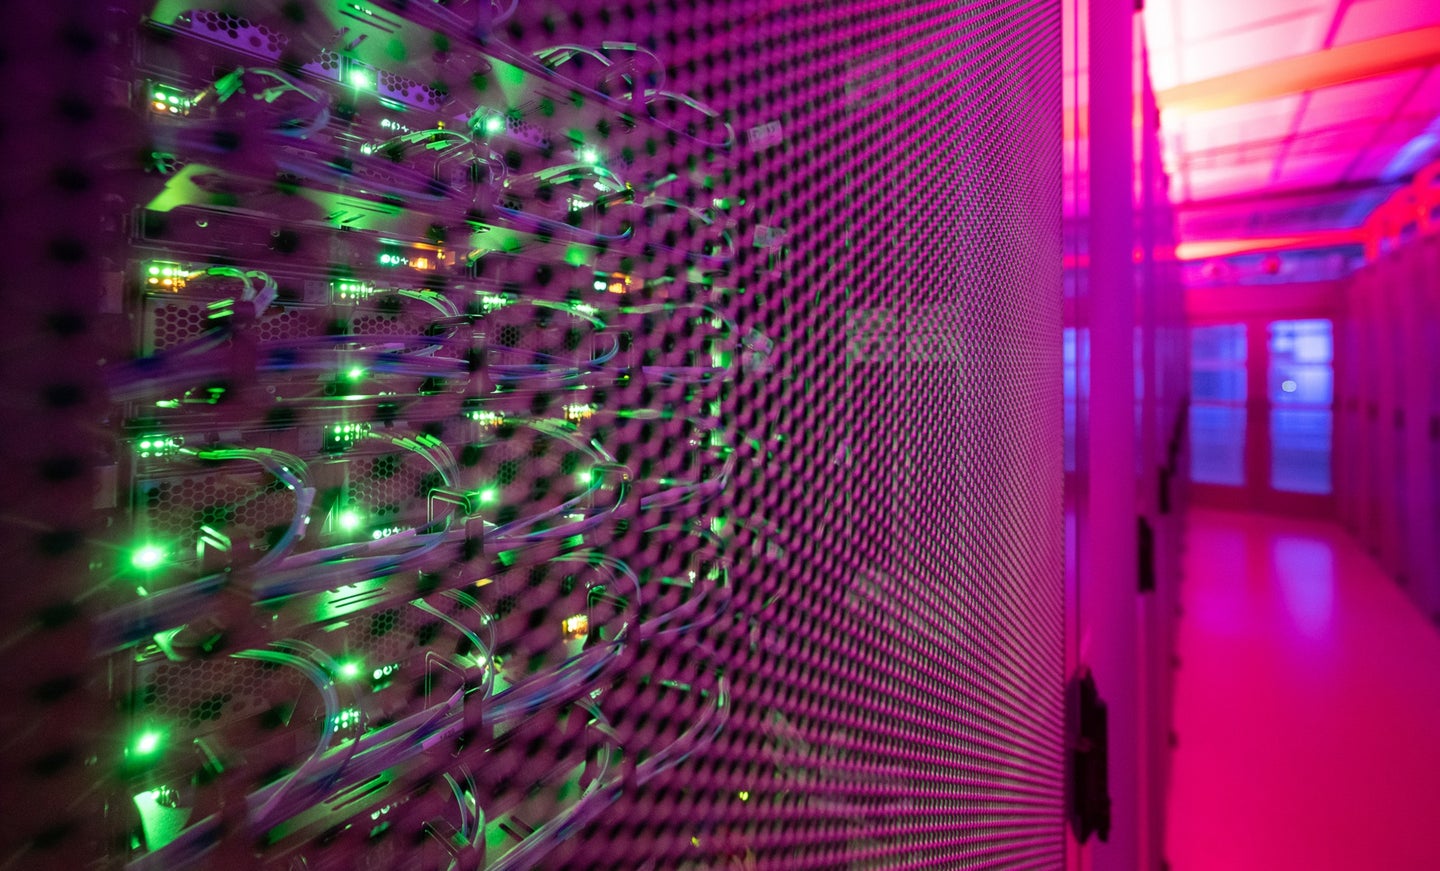 Internet data server farm with green and pink glowing LED lights